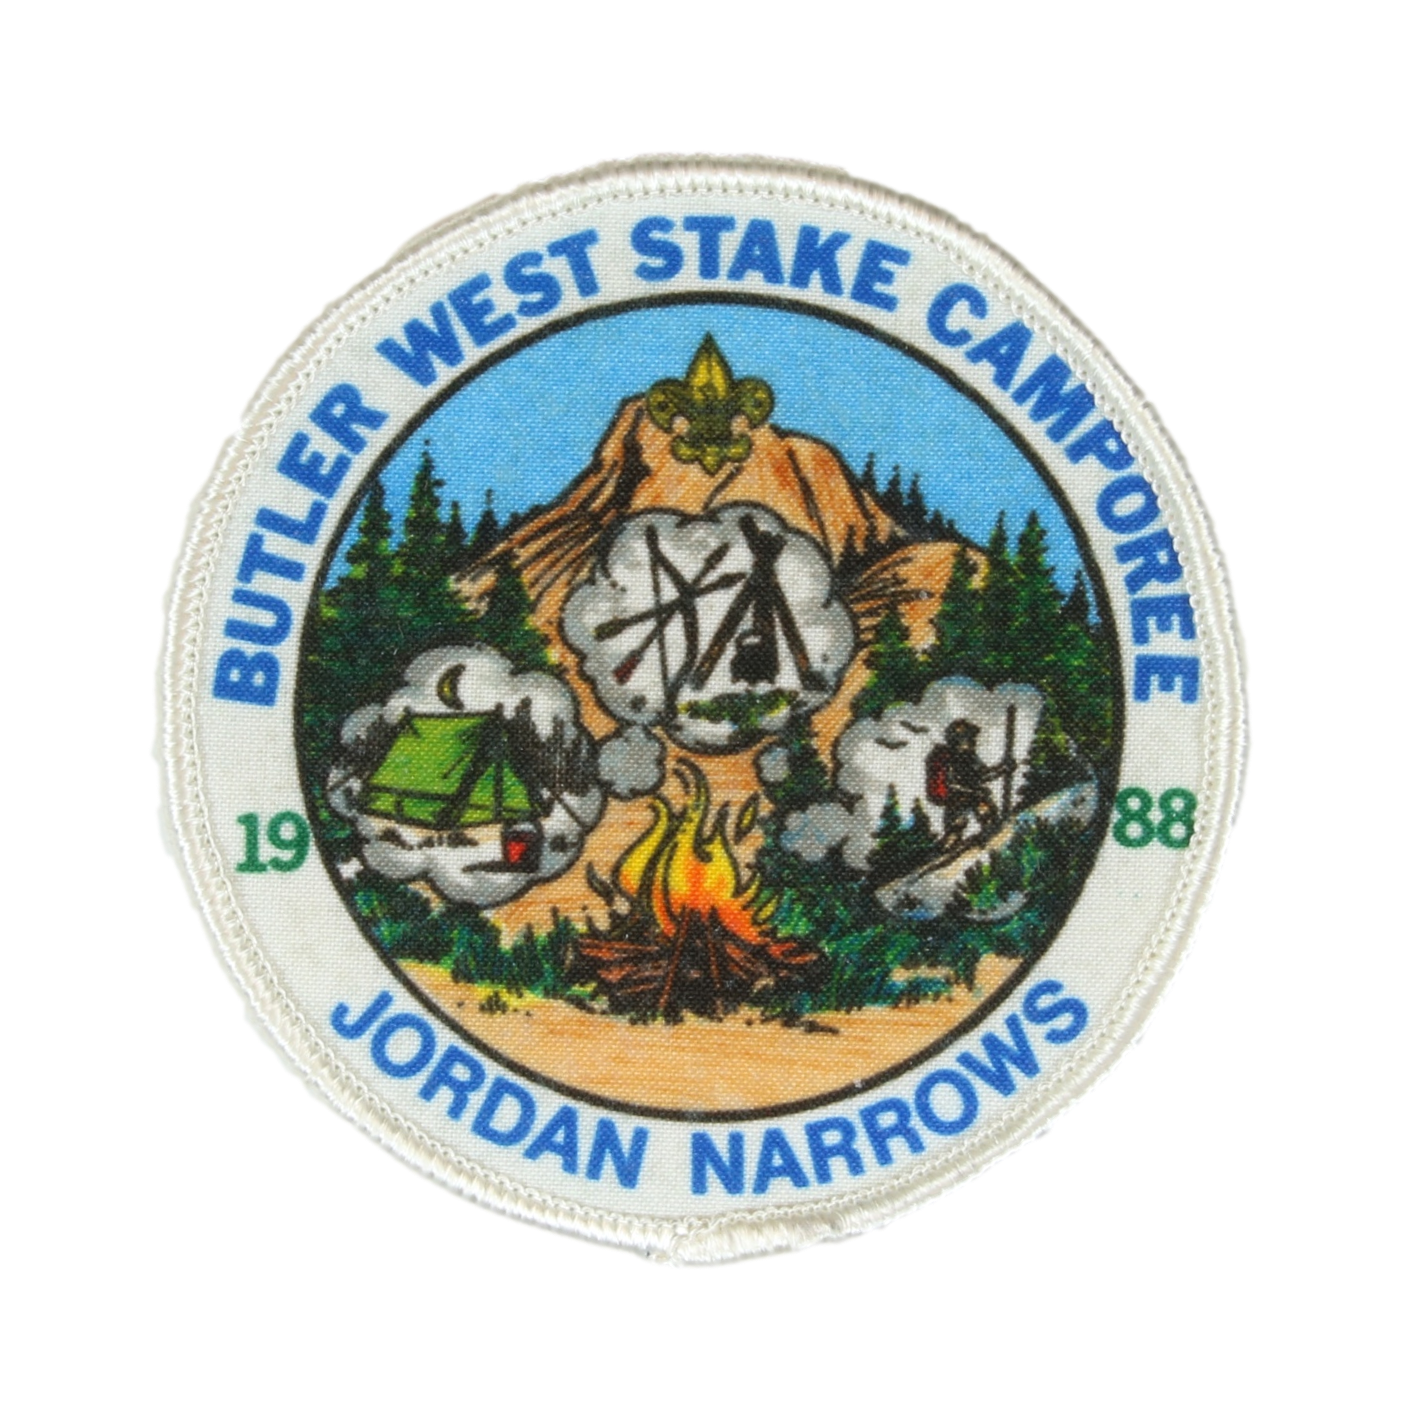 1988 Butler West Stake LDS Camporee Patch